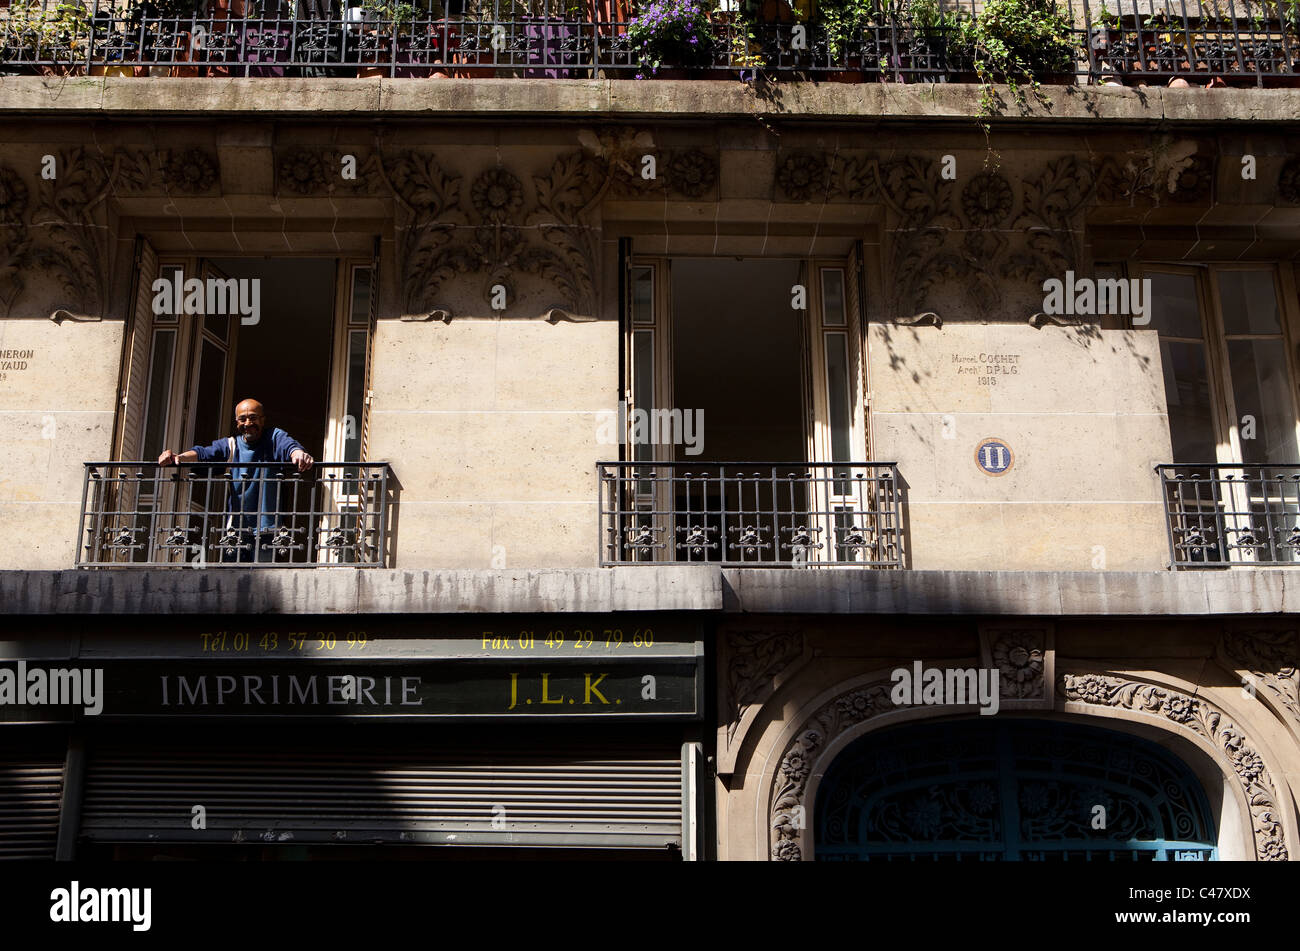 Paris and stock photography Alamy window - hi-res images balcony